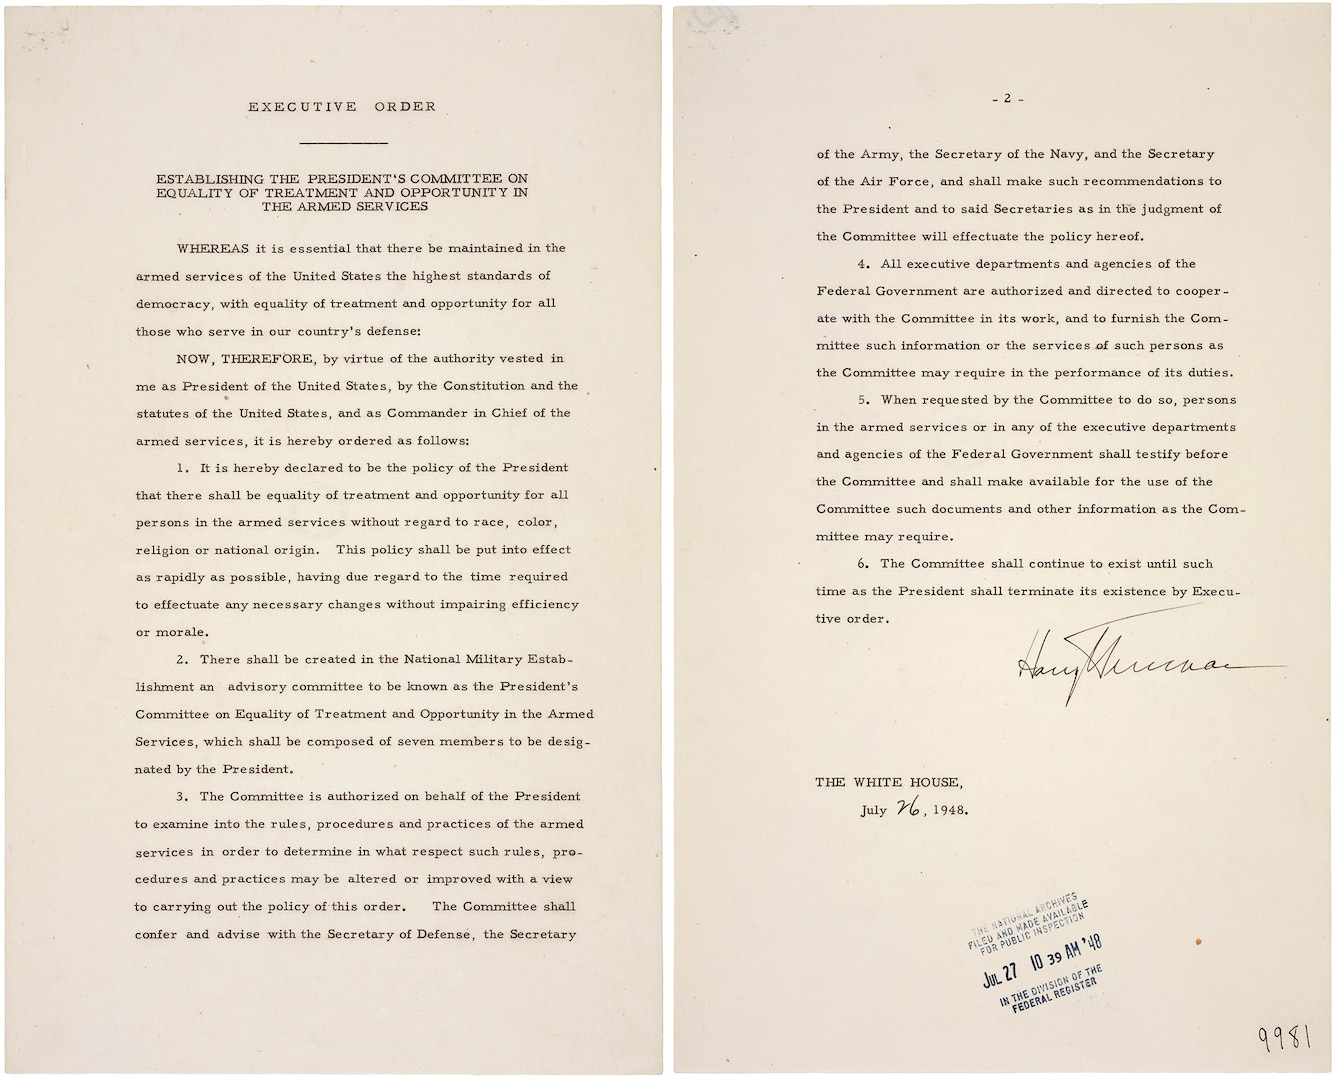 President Harry Truman, stymied by legislative inaction on ending military segregation, took pen to paper and ended it with Executive Order 9981, July 26, 1948.